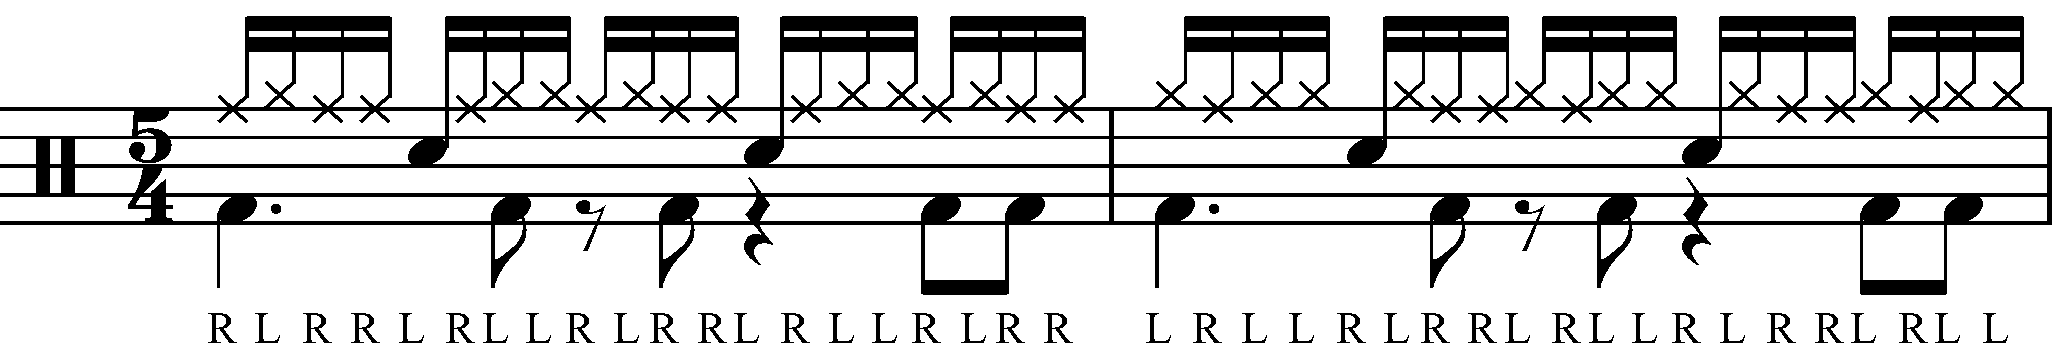 A 5/4 common time paradiddle groove